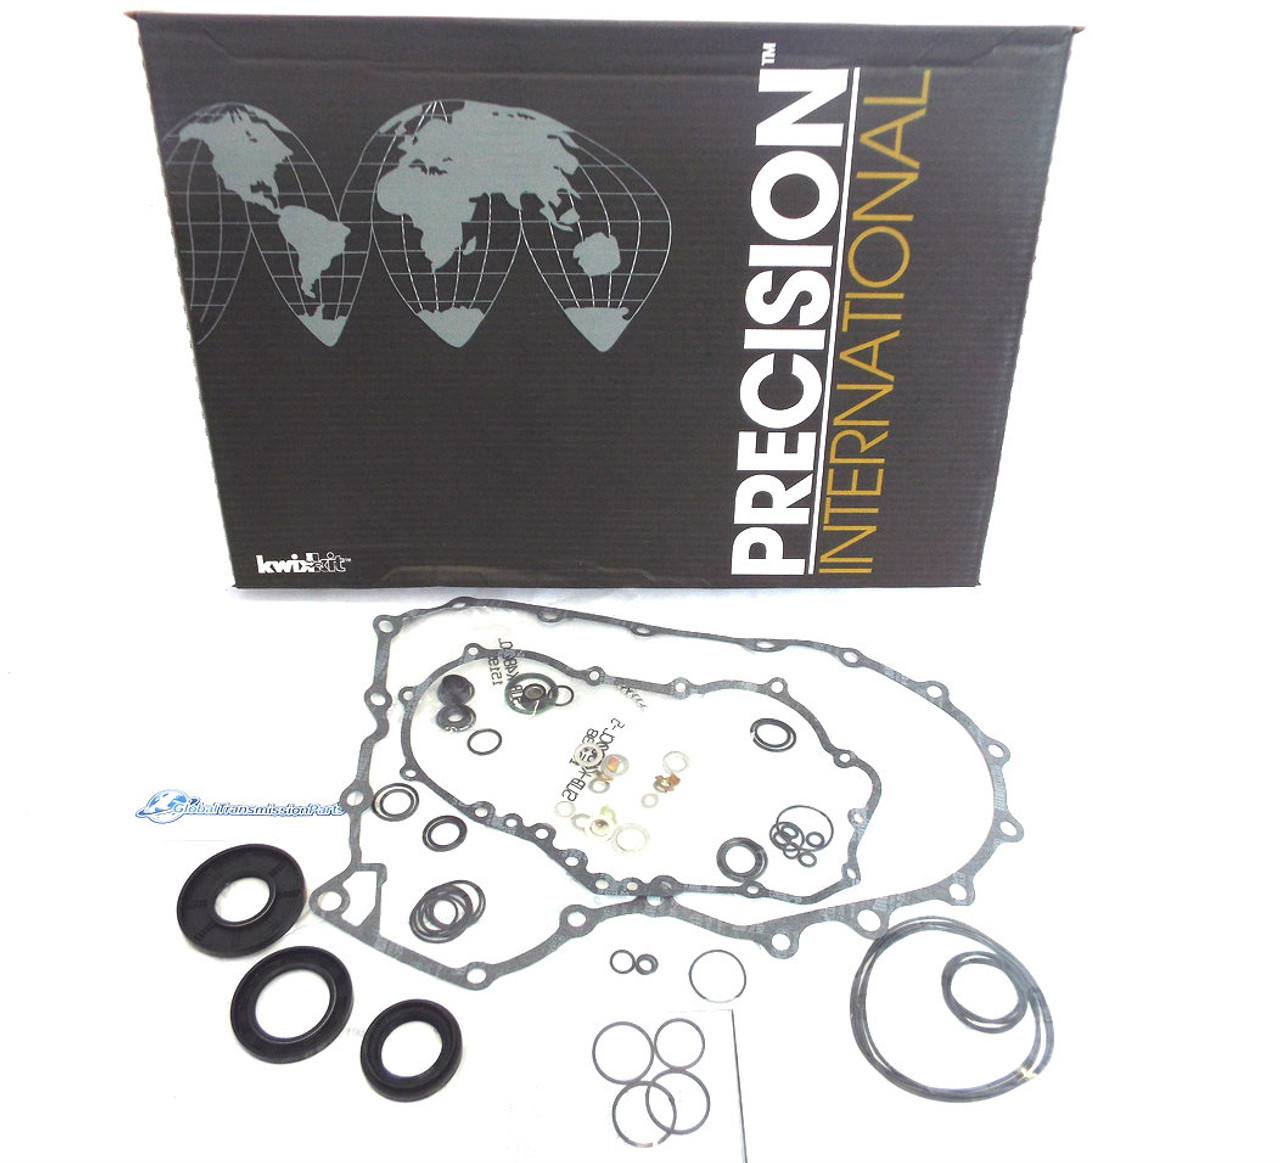 BMXA and SLXA transmission overhaul kit contains the highest quality gasket and seals manufactured in the USA by Precision International.